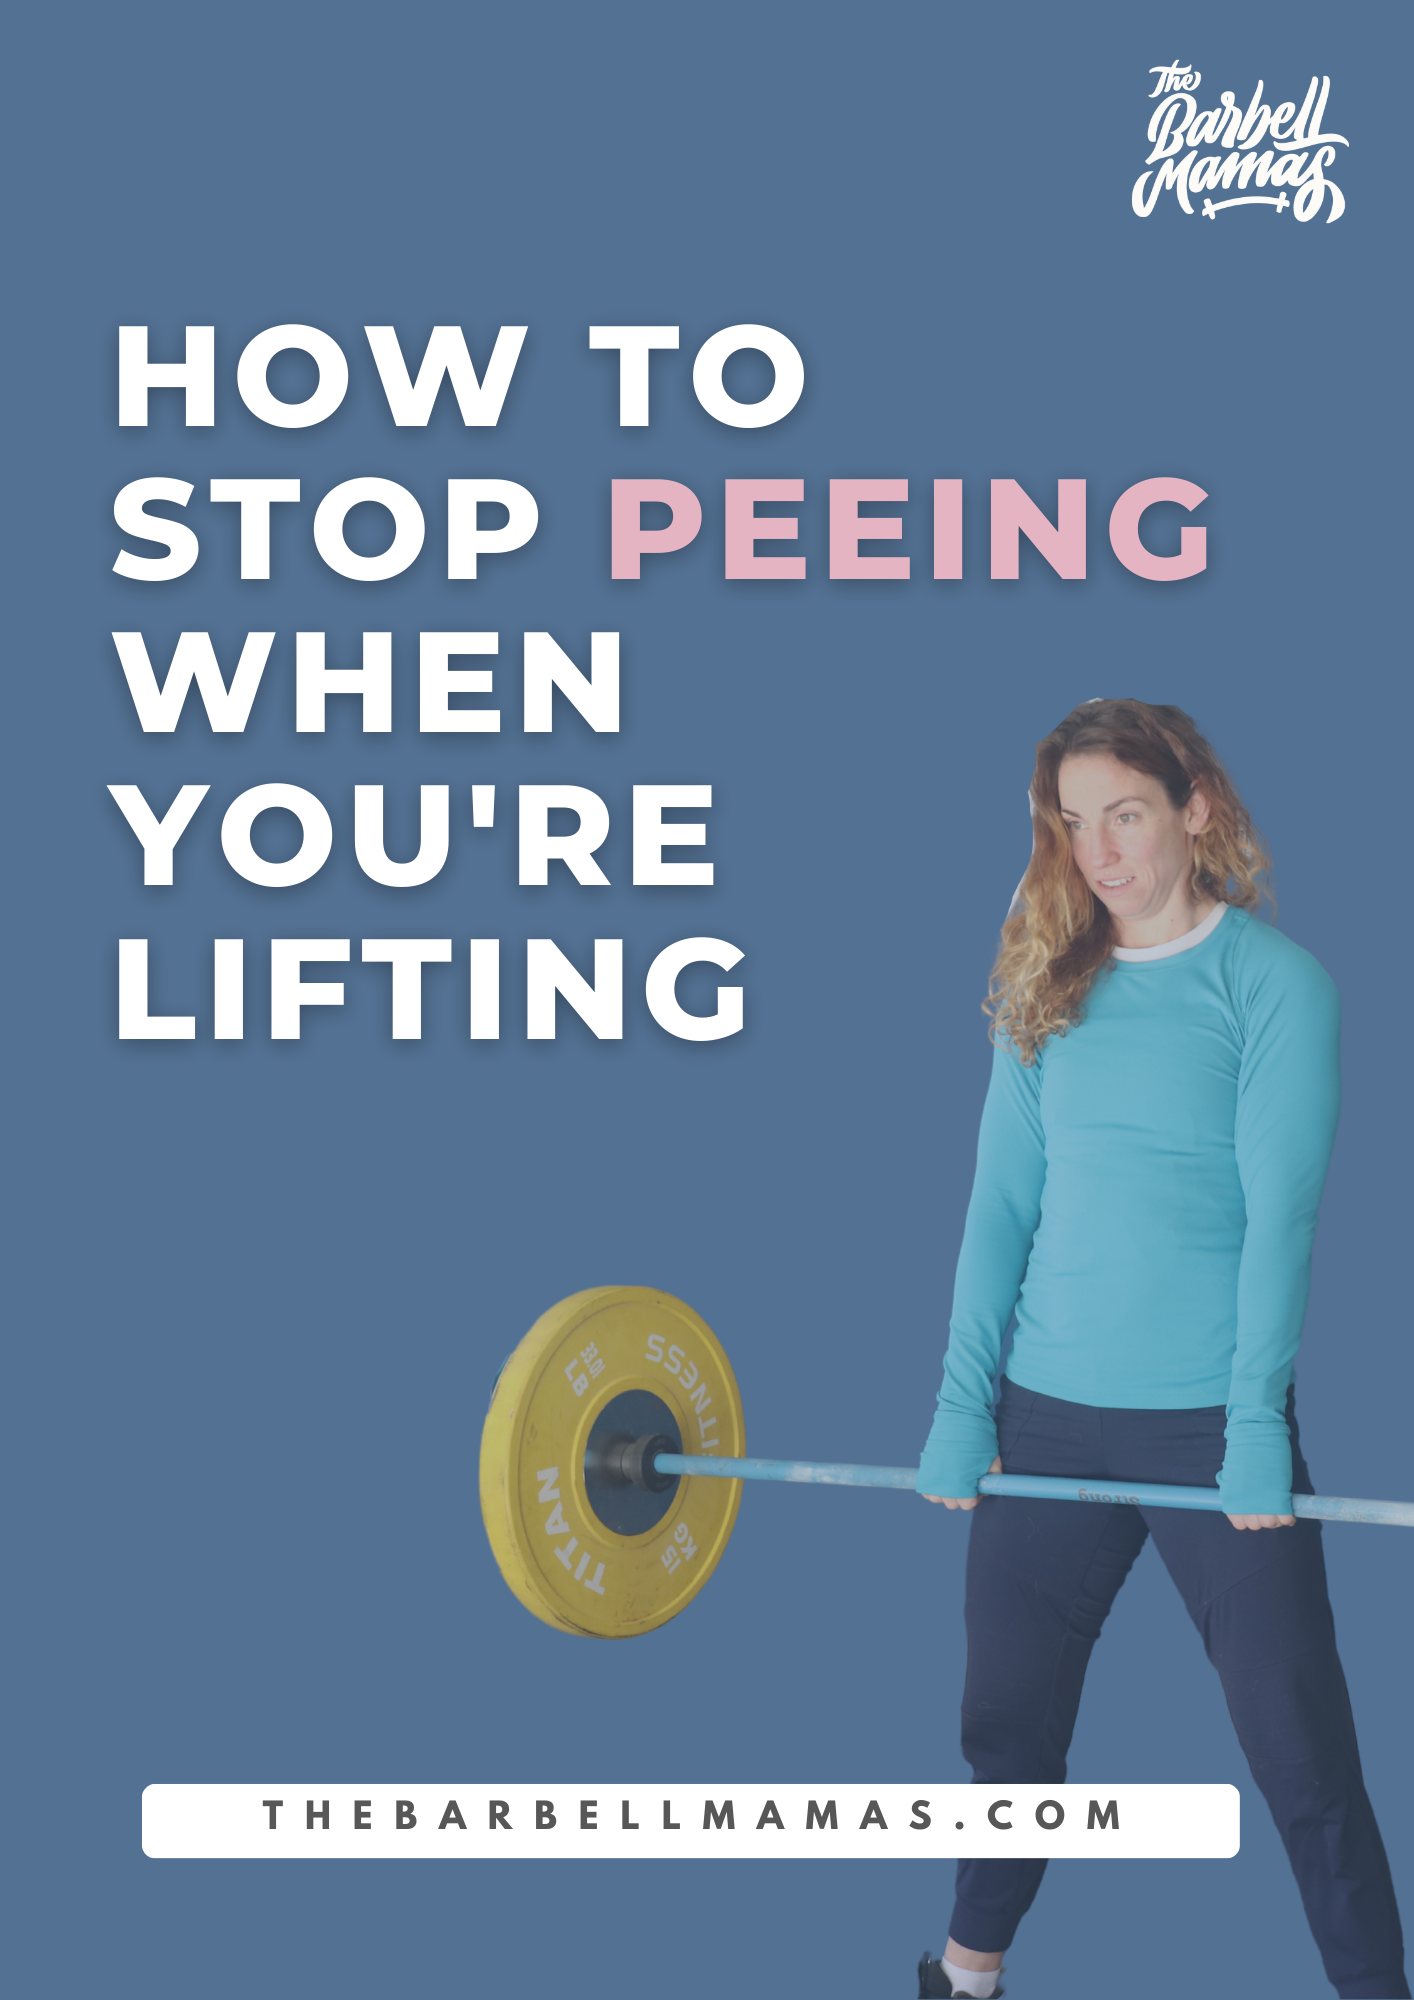 Stop Peeing when you Lift